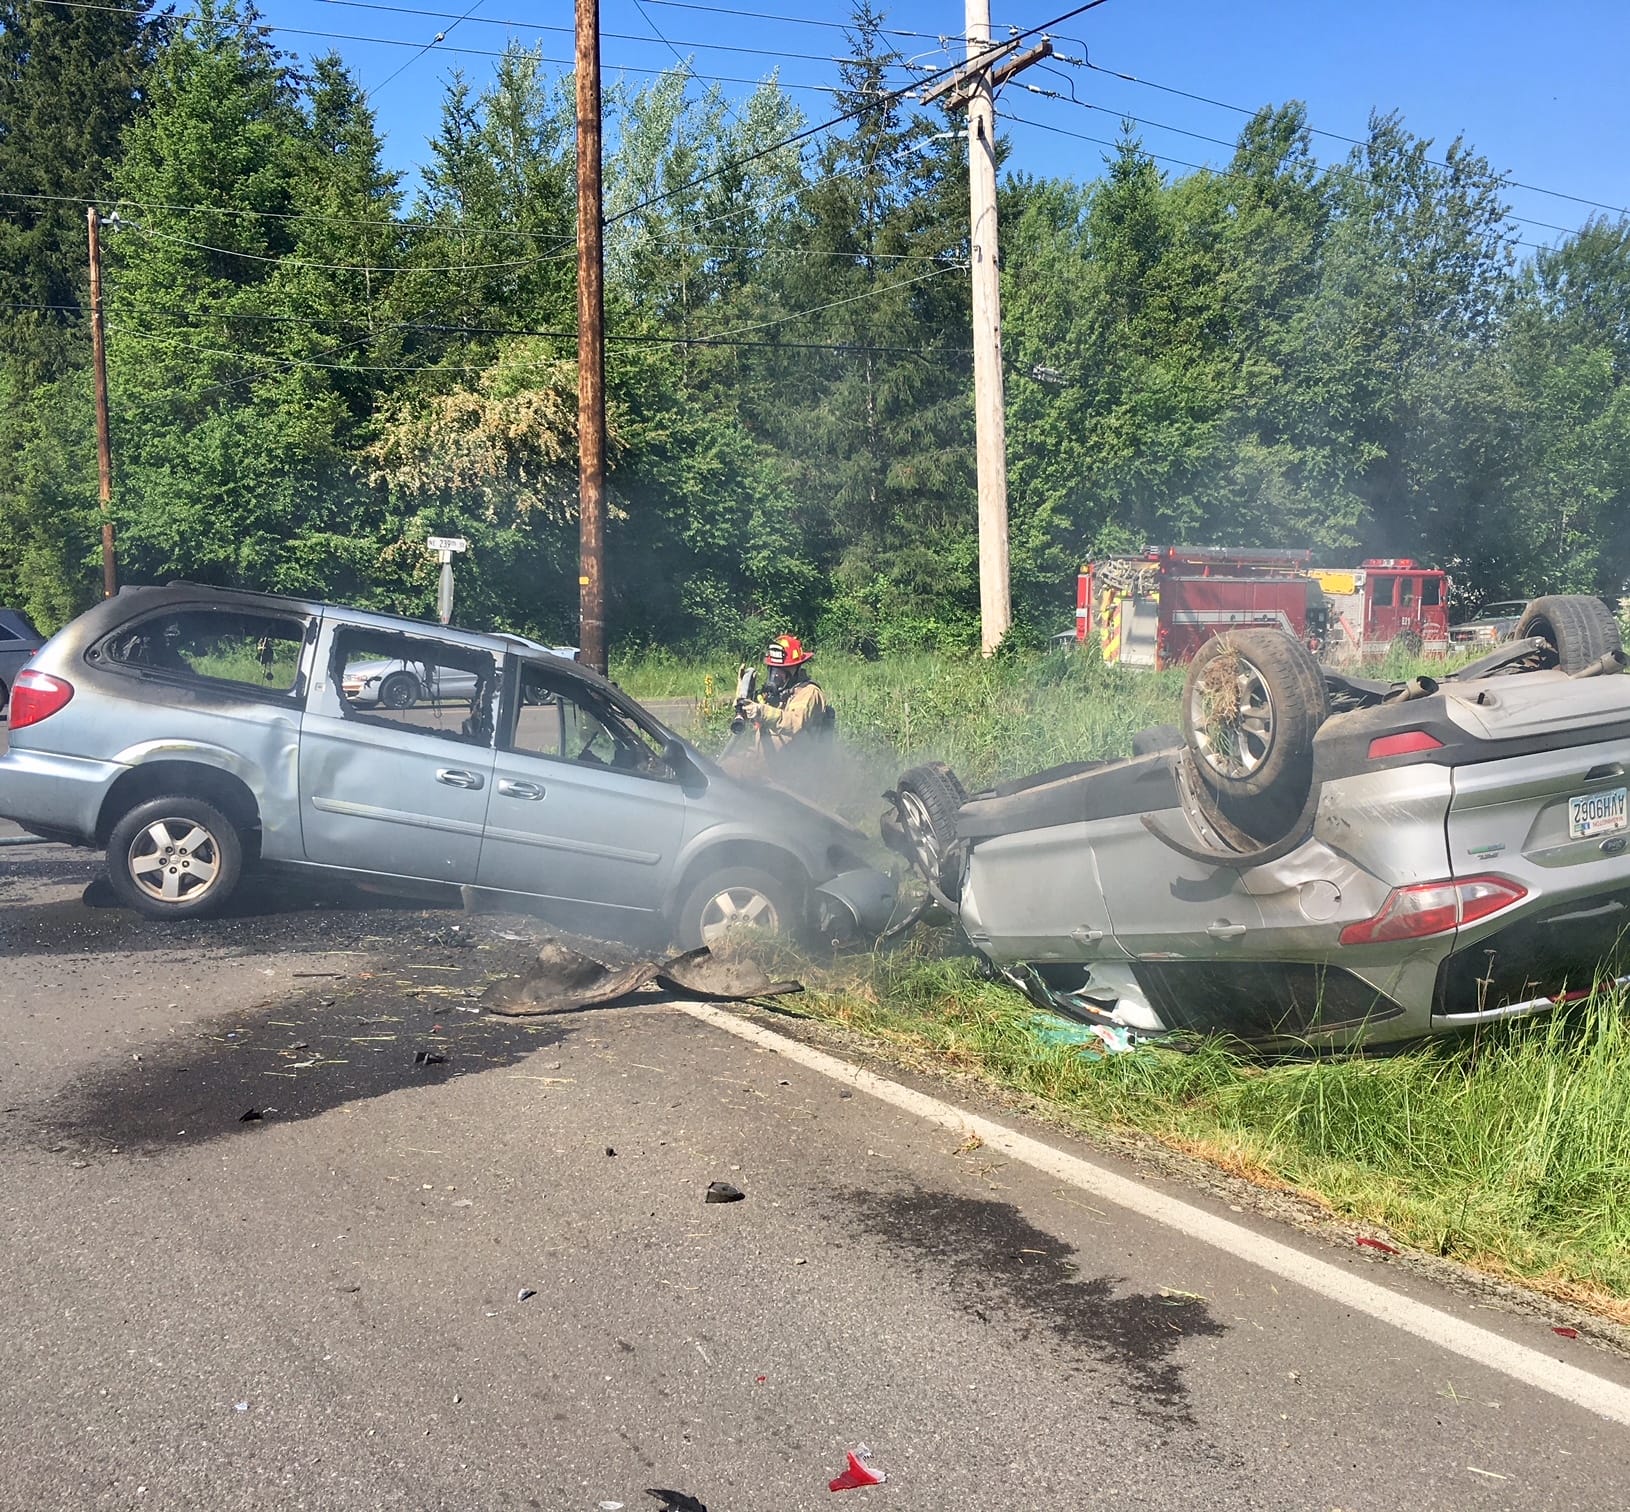 Firefighters respond following a two-vehicle collision west of Battle Ground Monday afternoon. Two people were hurt in the crash, and the Clark County Sheriff's Office was investigating what happened.